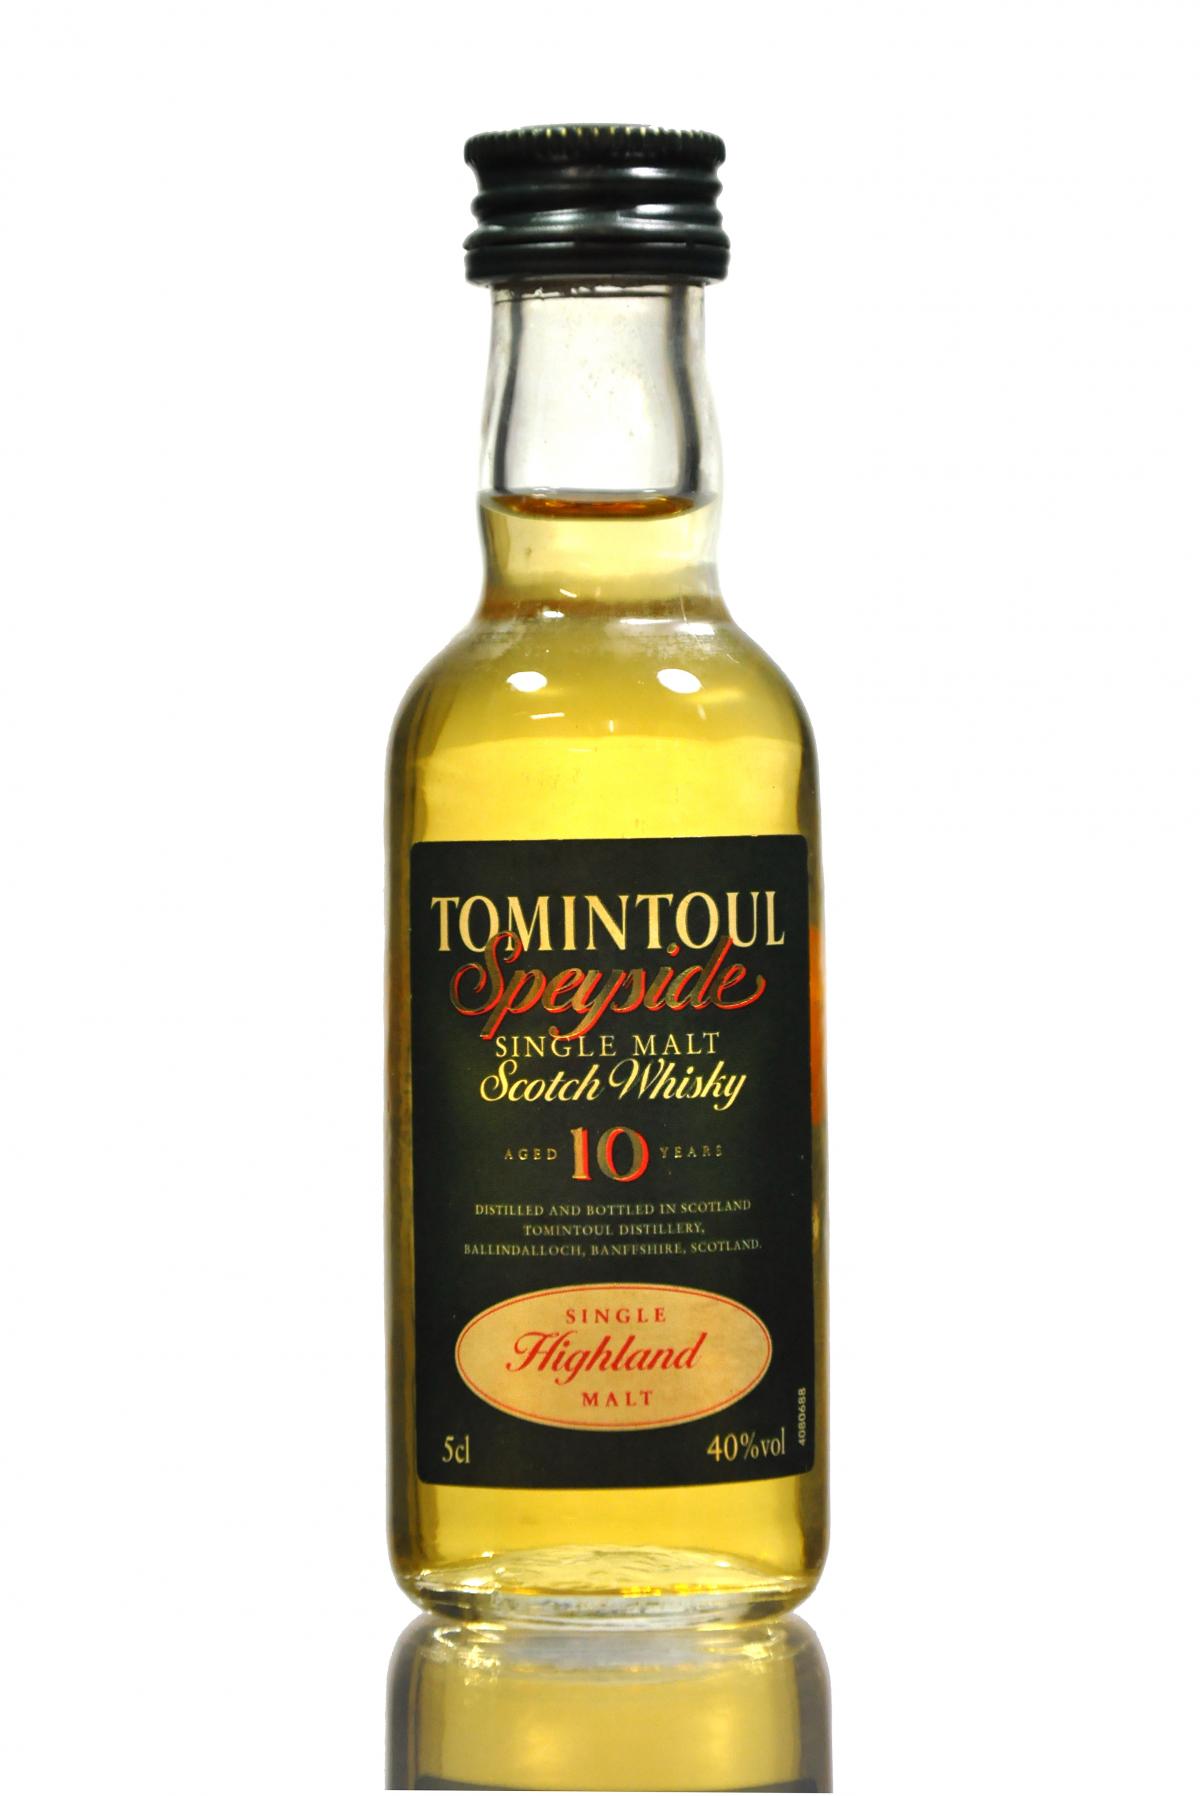 Tomintoul Speyside 10 Year Old Miniature